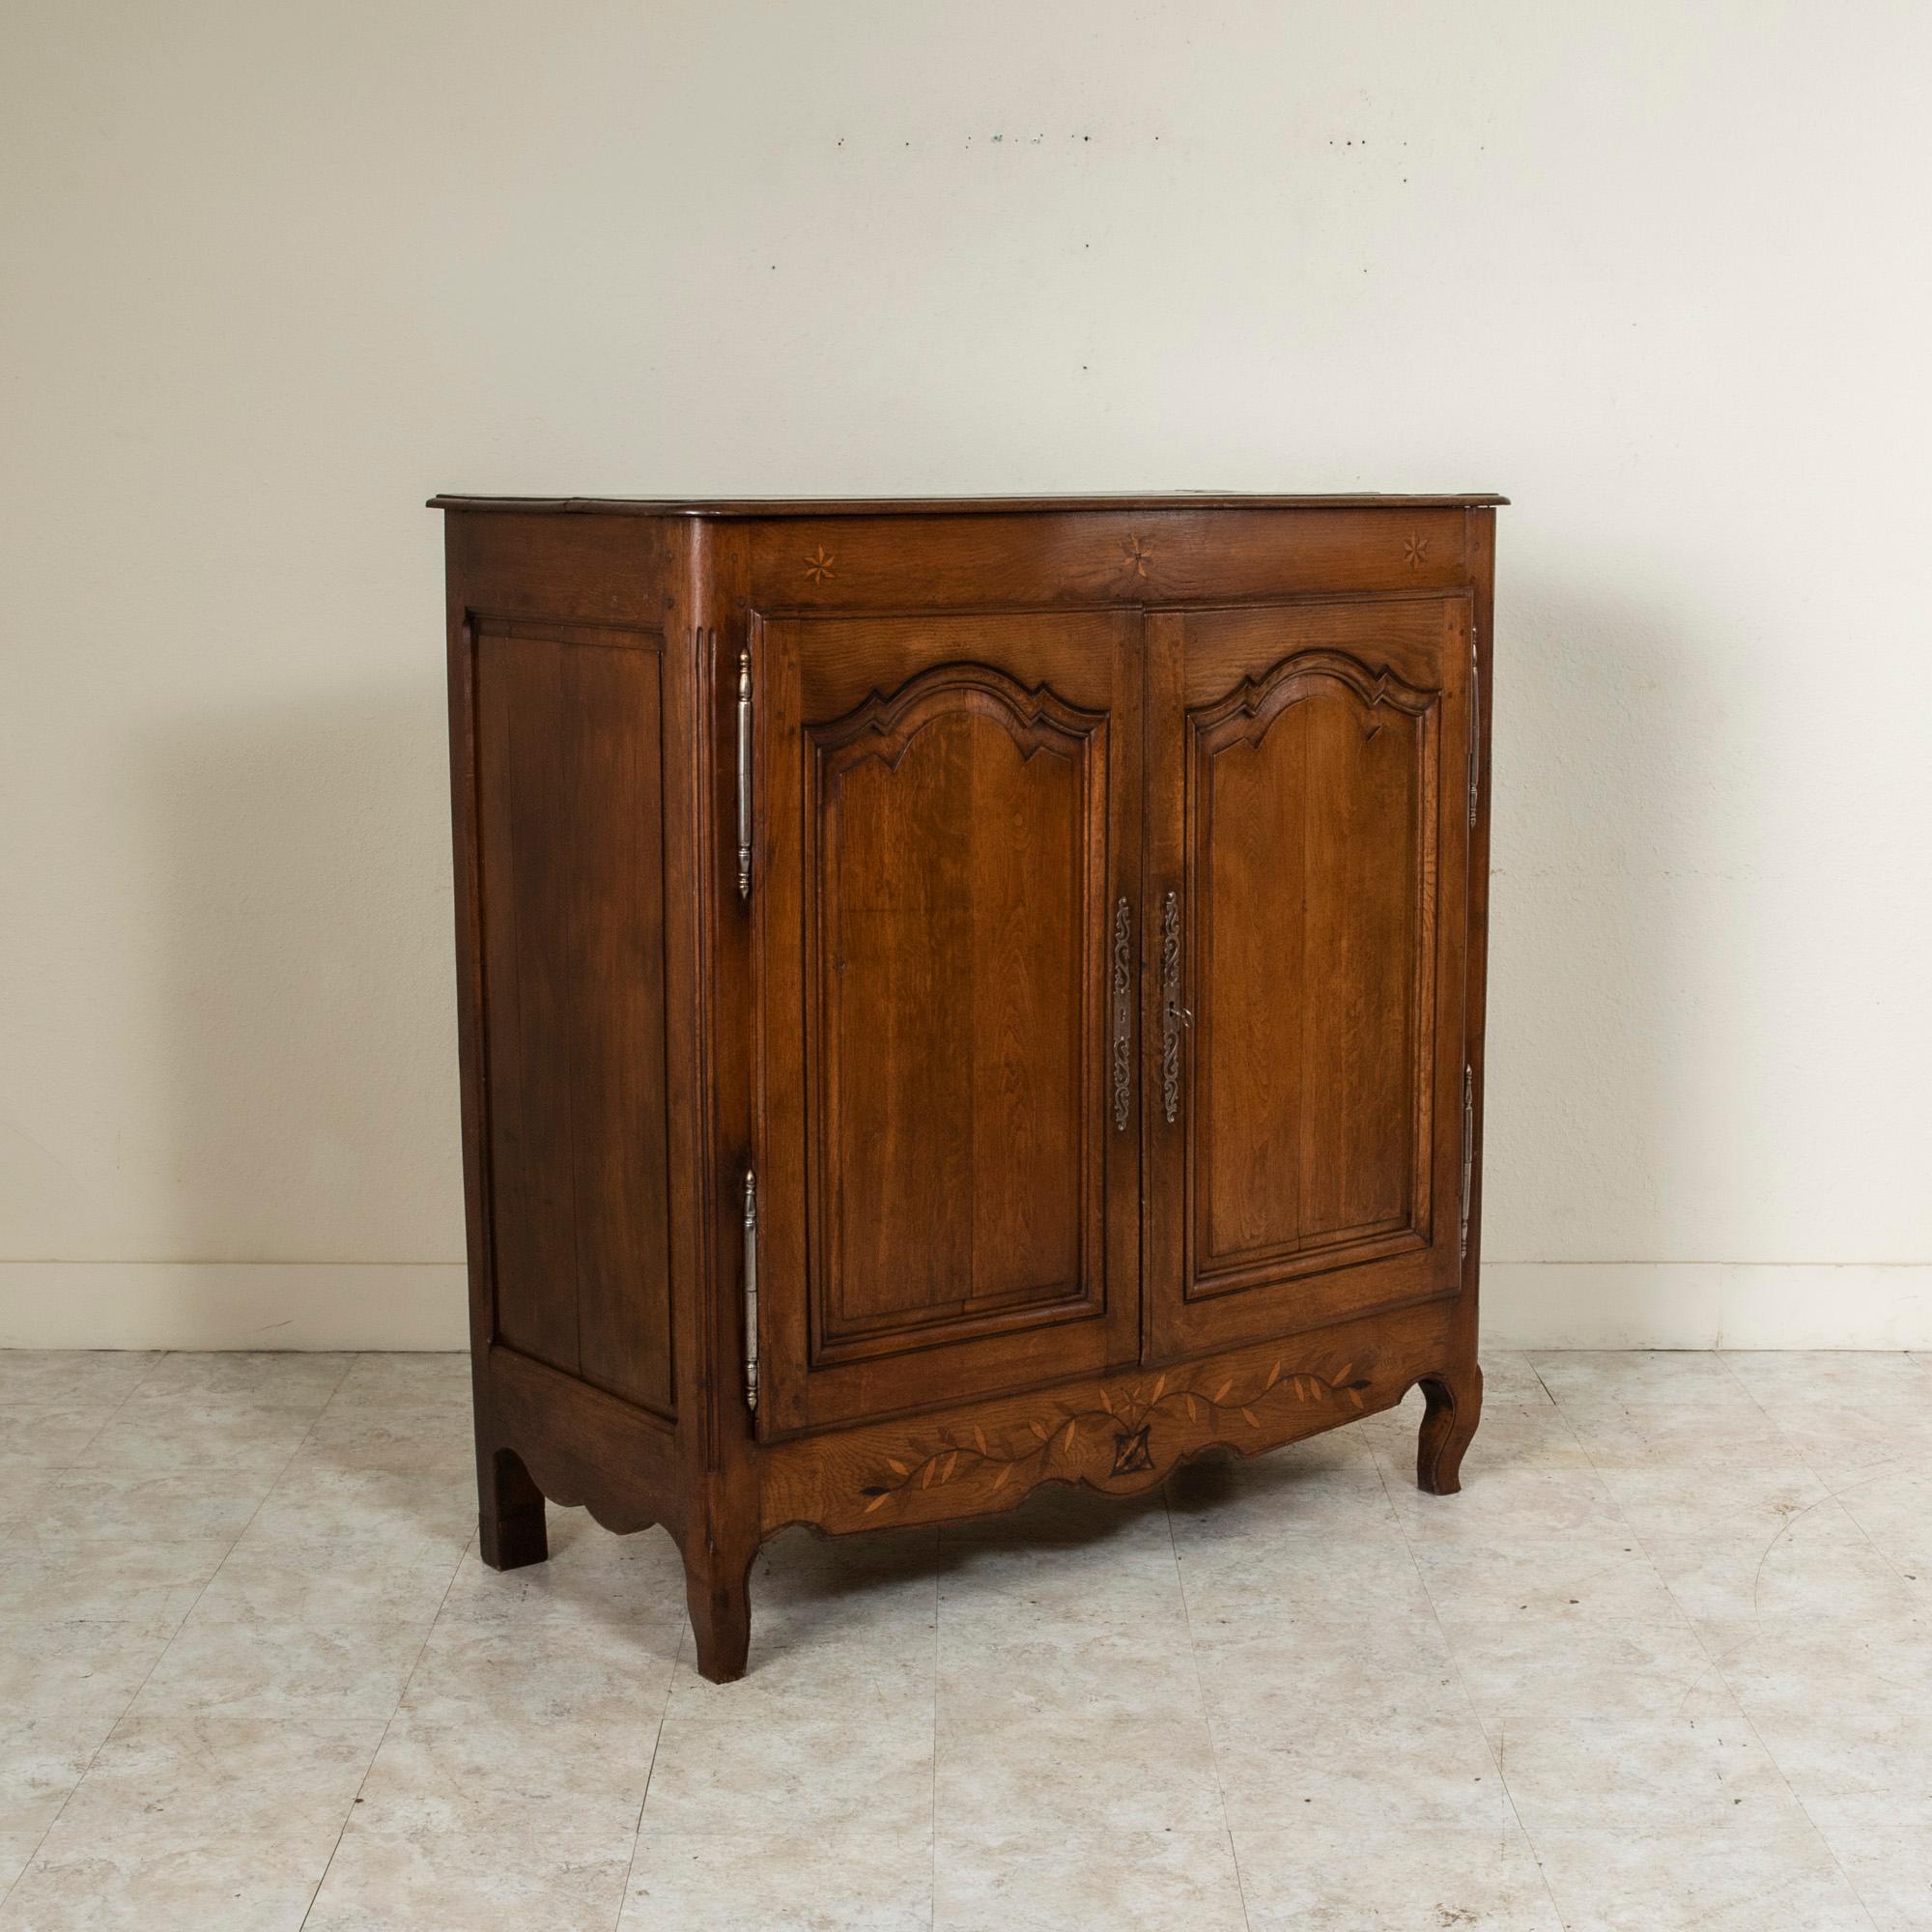 From the town of Bazoches in the Le Perche region of Normandy, France, this hand carved oak bassette or petite armoire from the early 19th century is detailed with inlaid exotic woods depicting vines, leaves and stars. Its two paneled doors on iron